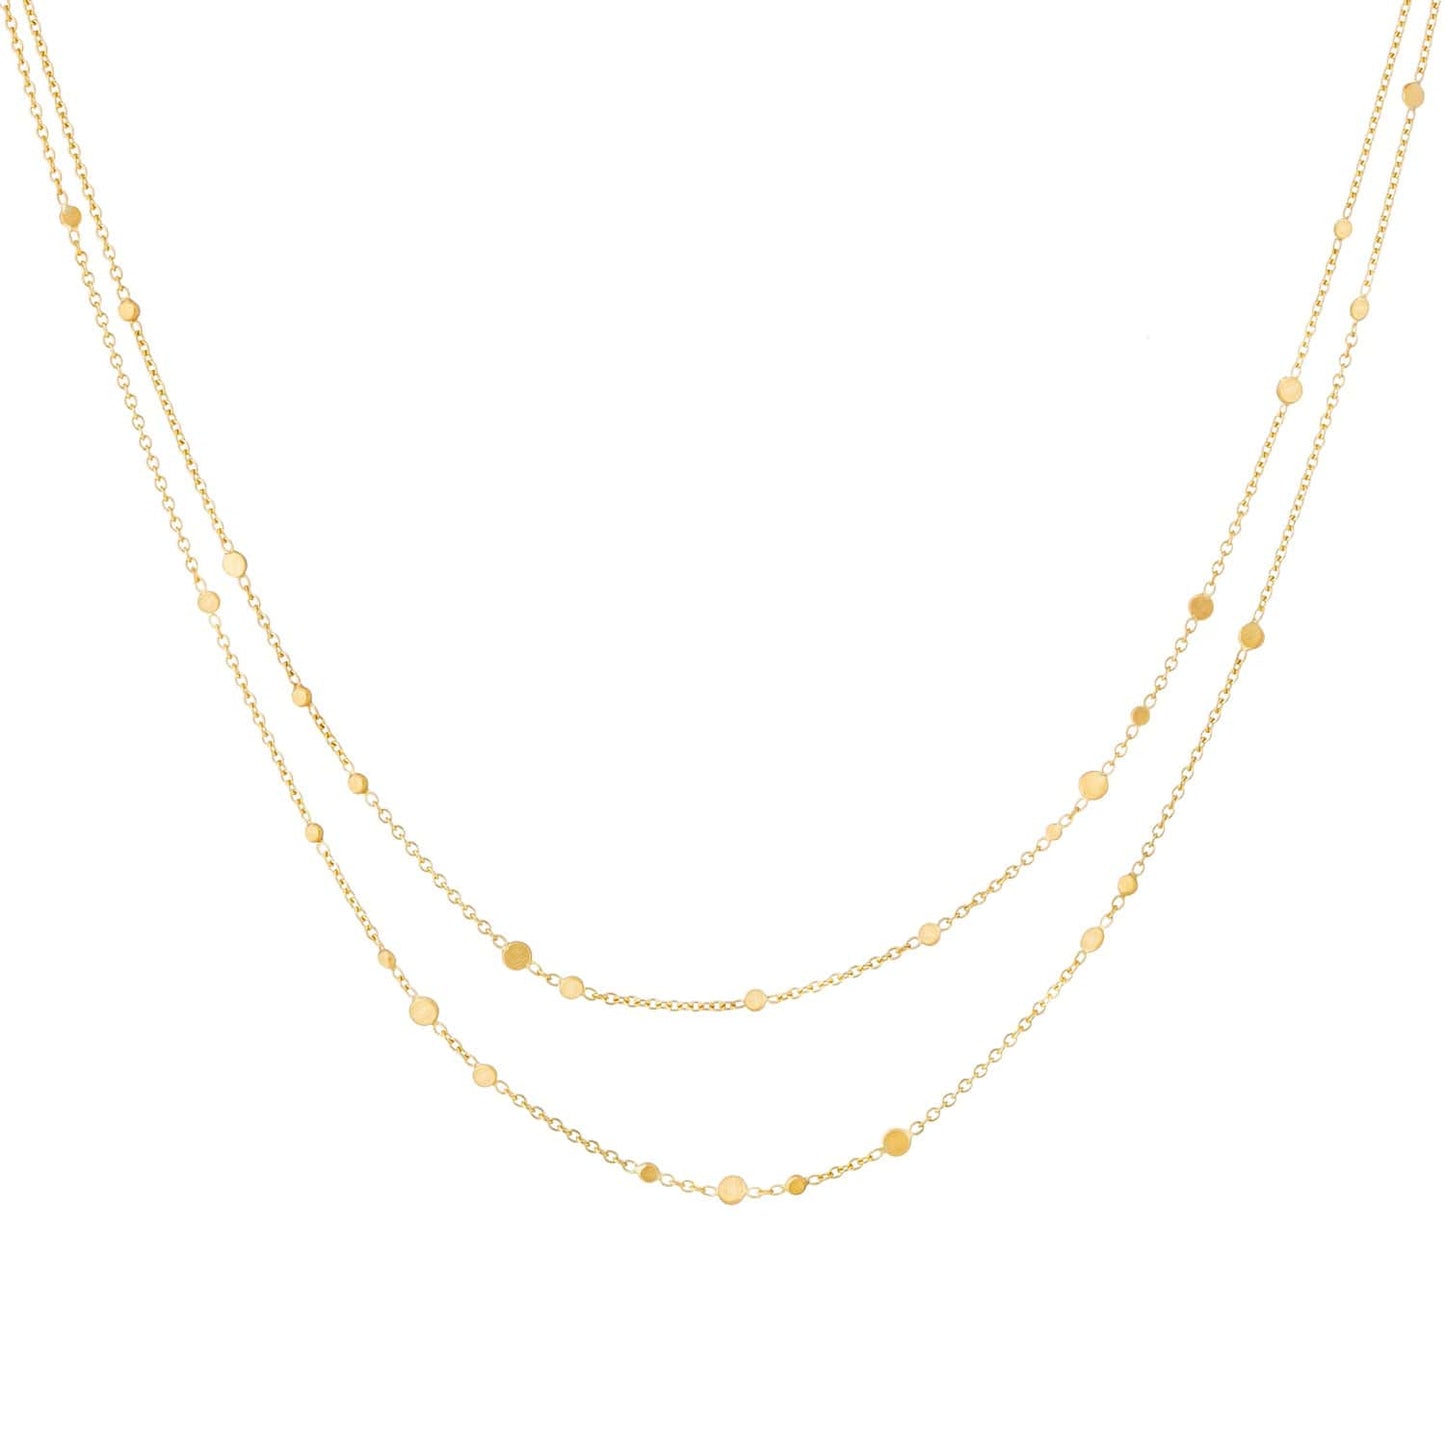 NKL-18K 18k Yellow Gold Scattered Dust Double Chain Necklace